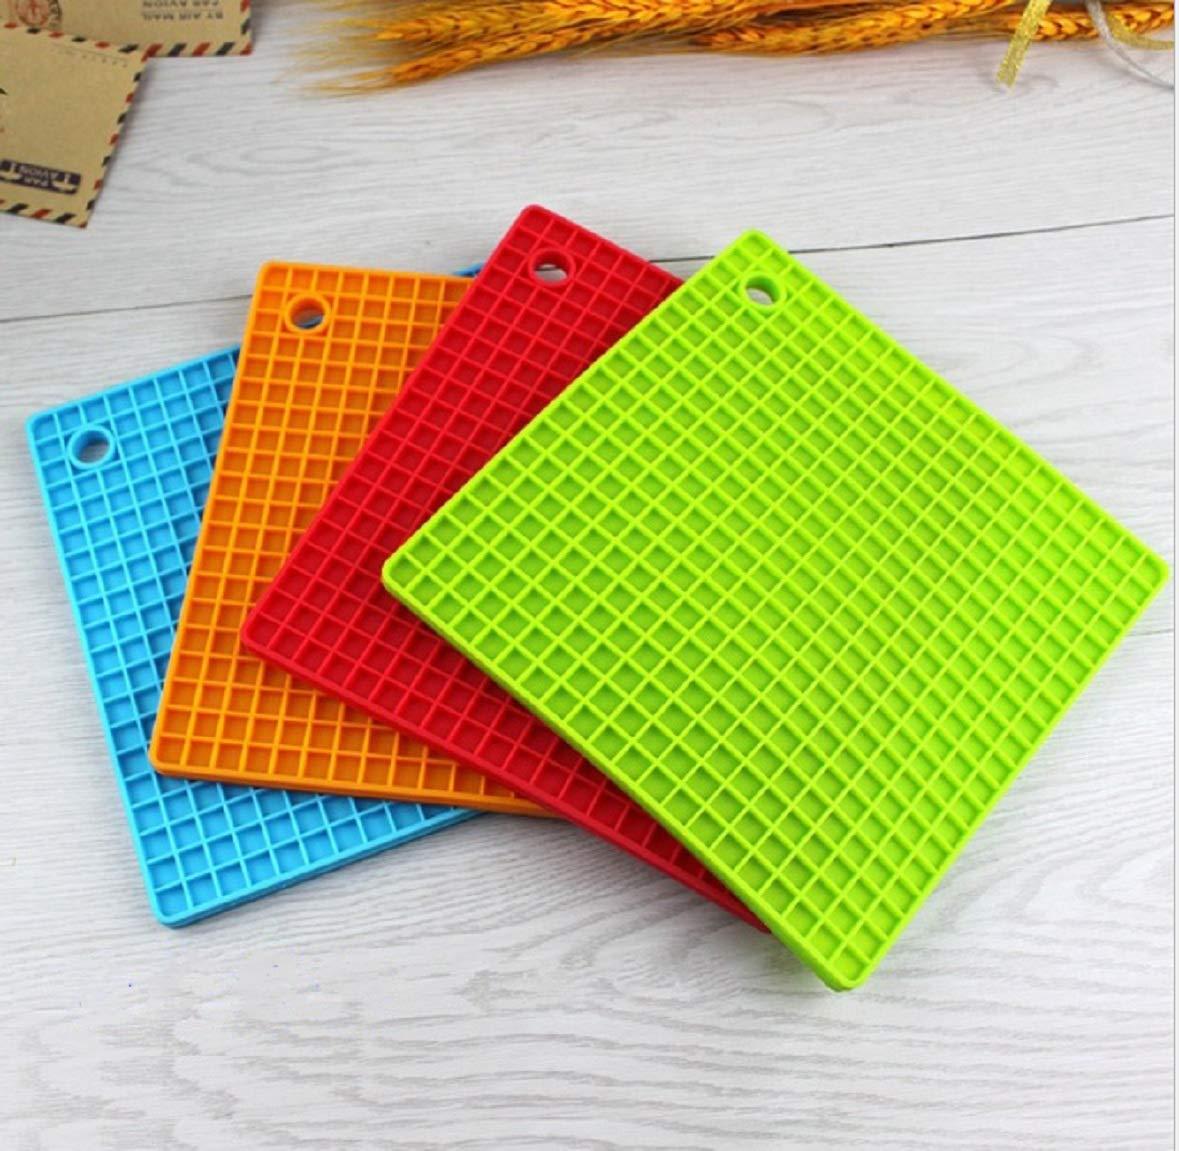 (Pack of 2) Flexible Honeycomb Silicone Round Pot Holder Non-slip Durable Heat Resistant Placemat Table Mat